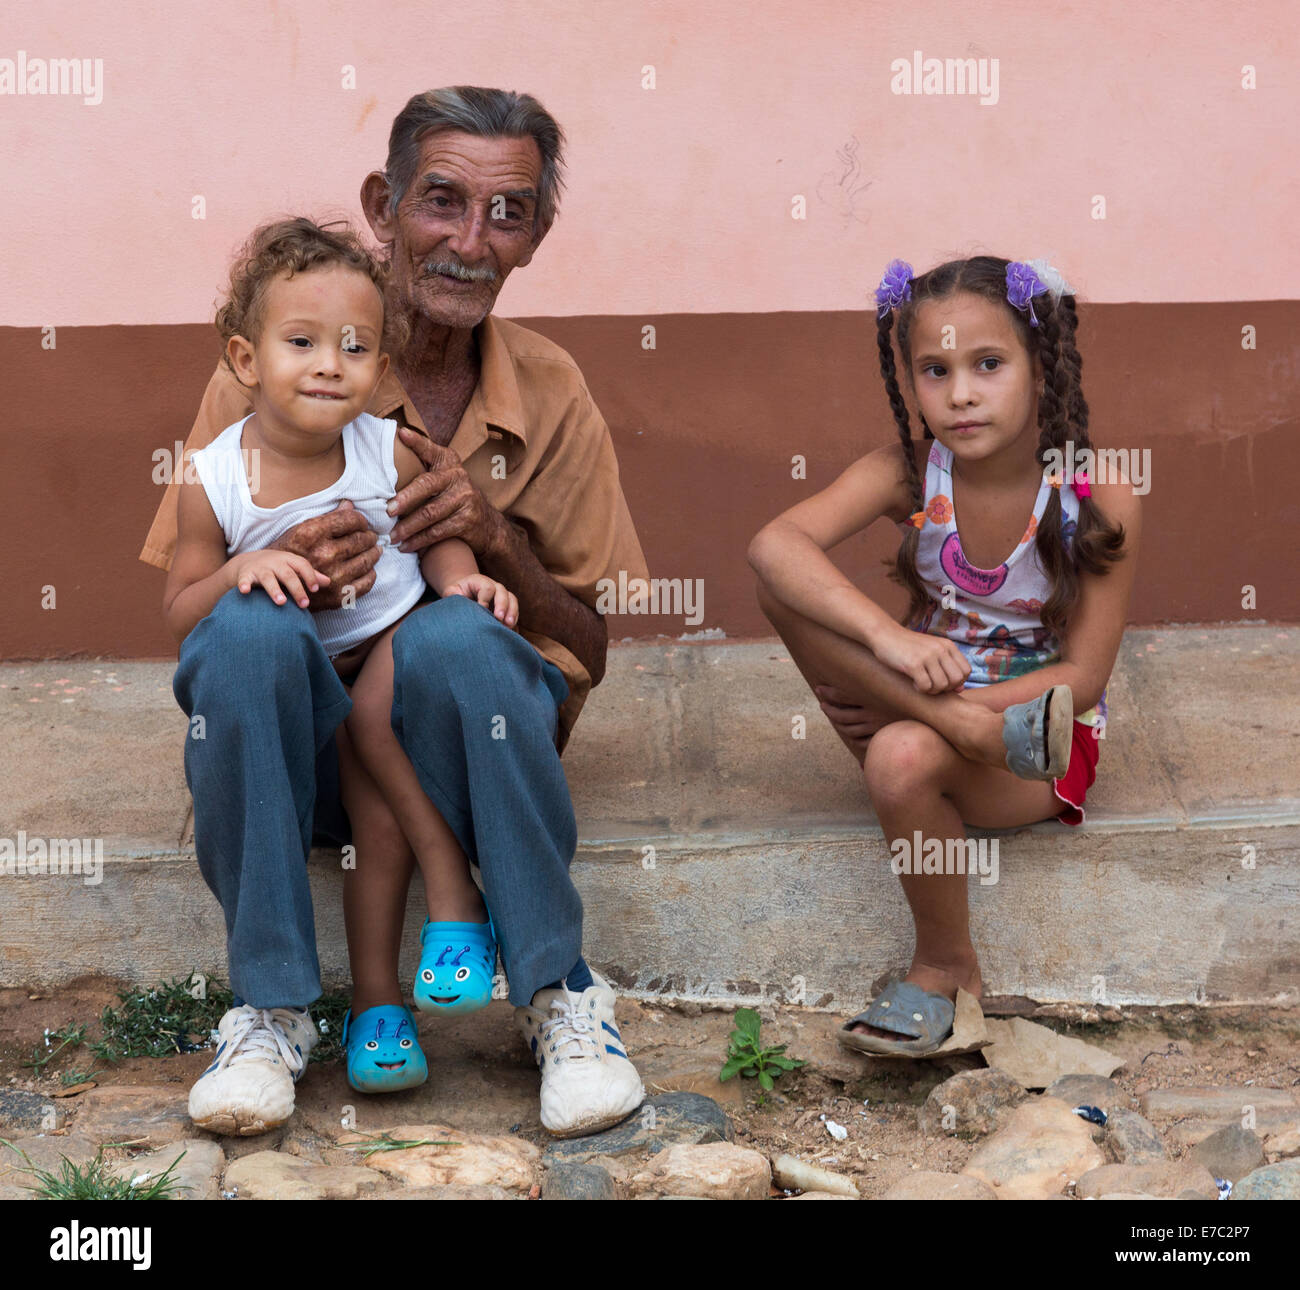 old man with two young children, Trinidad, Cuba Stock Photo